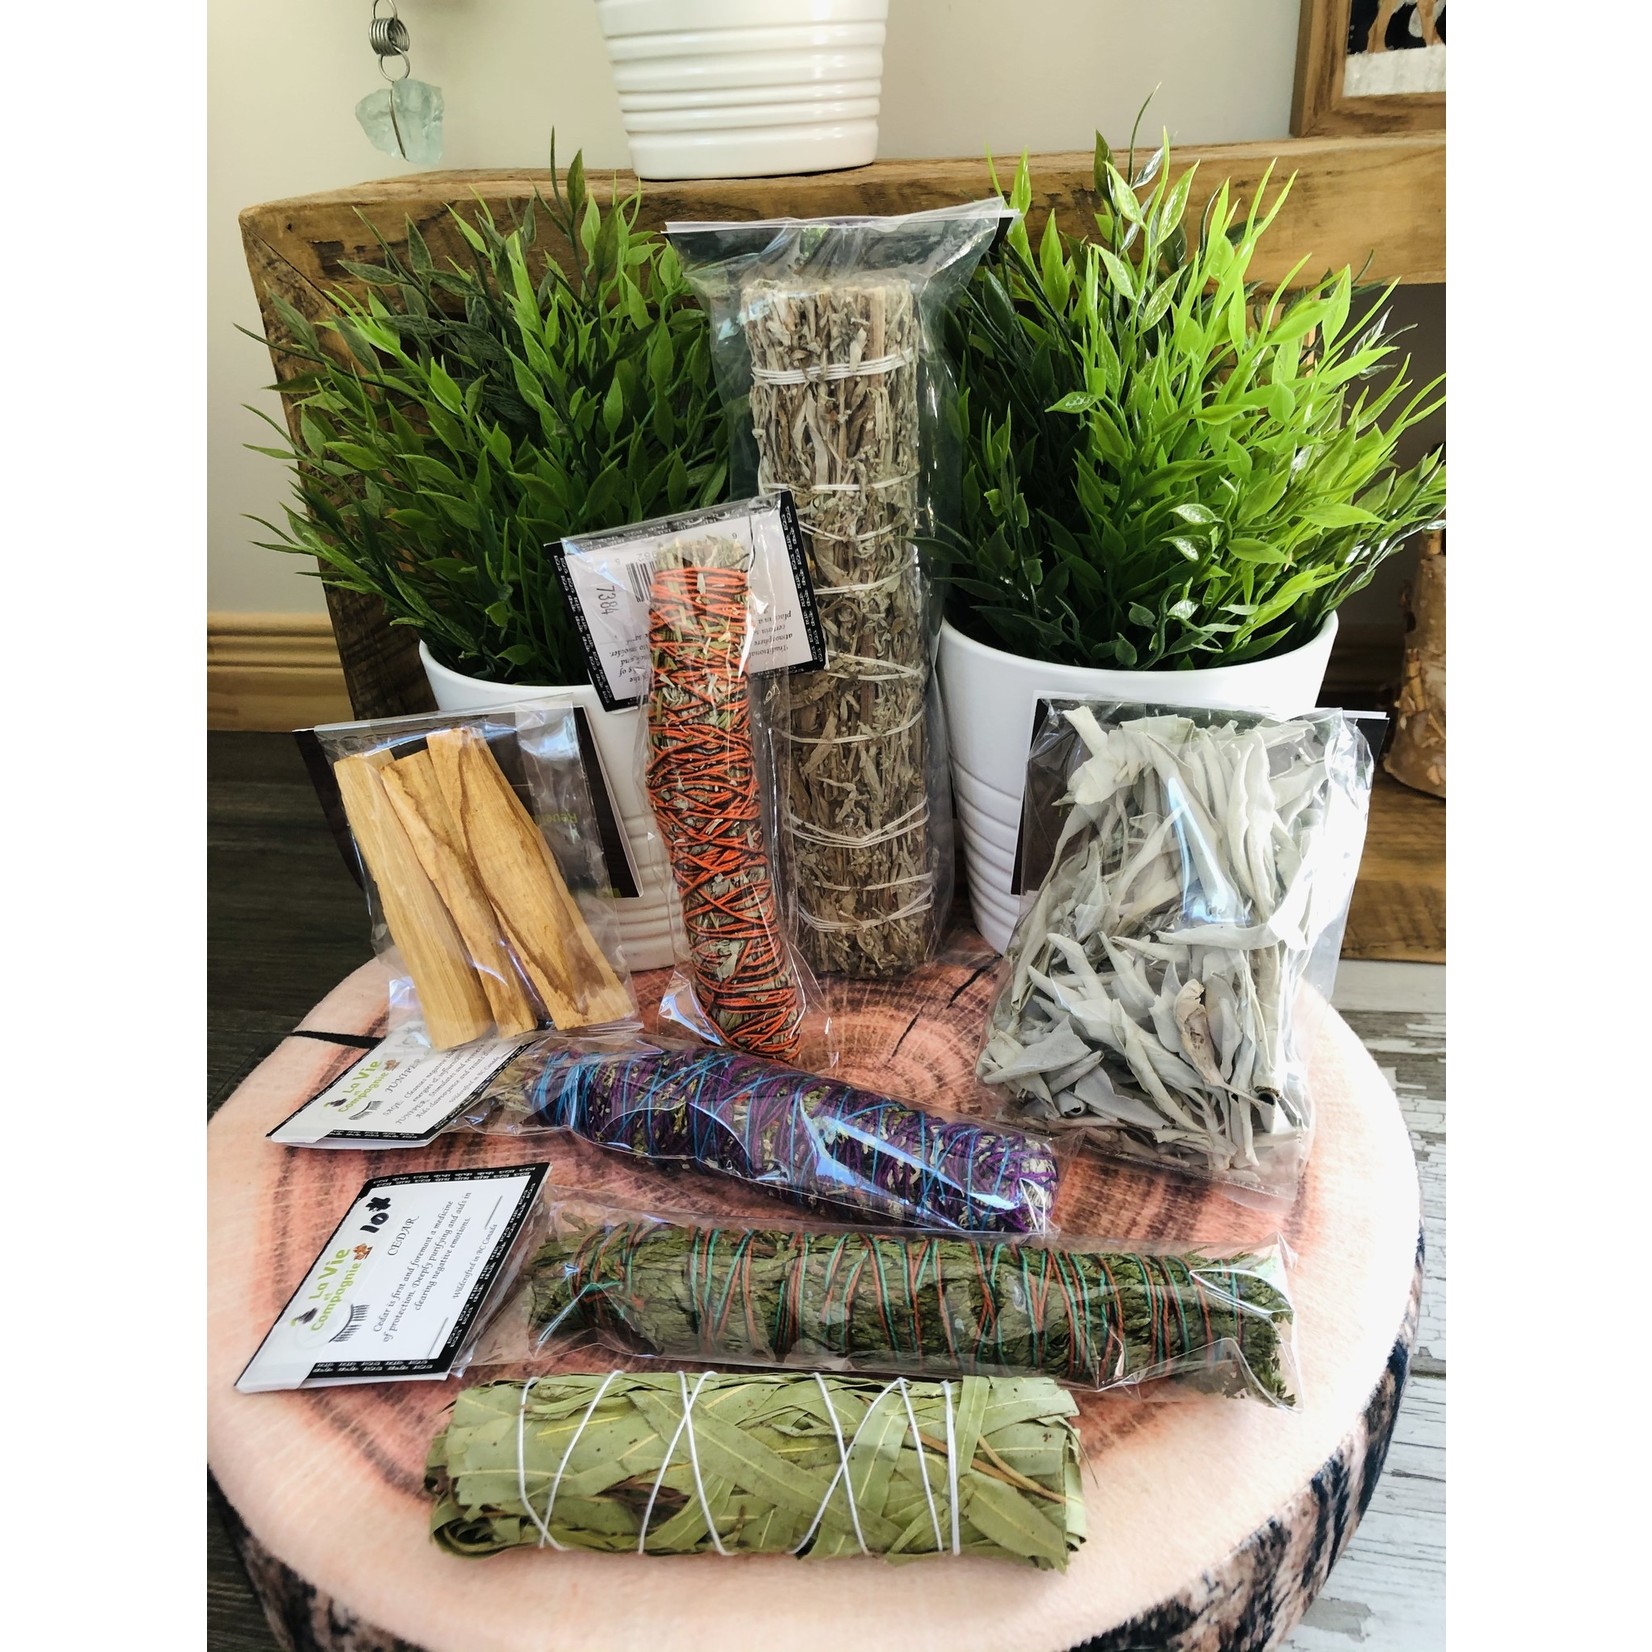 Palo Santo sticks (3), this sacred wood has been used for thousands of years by shamans and healers among the Inca population